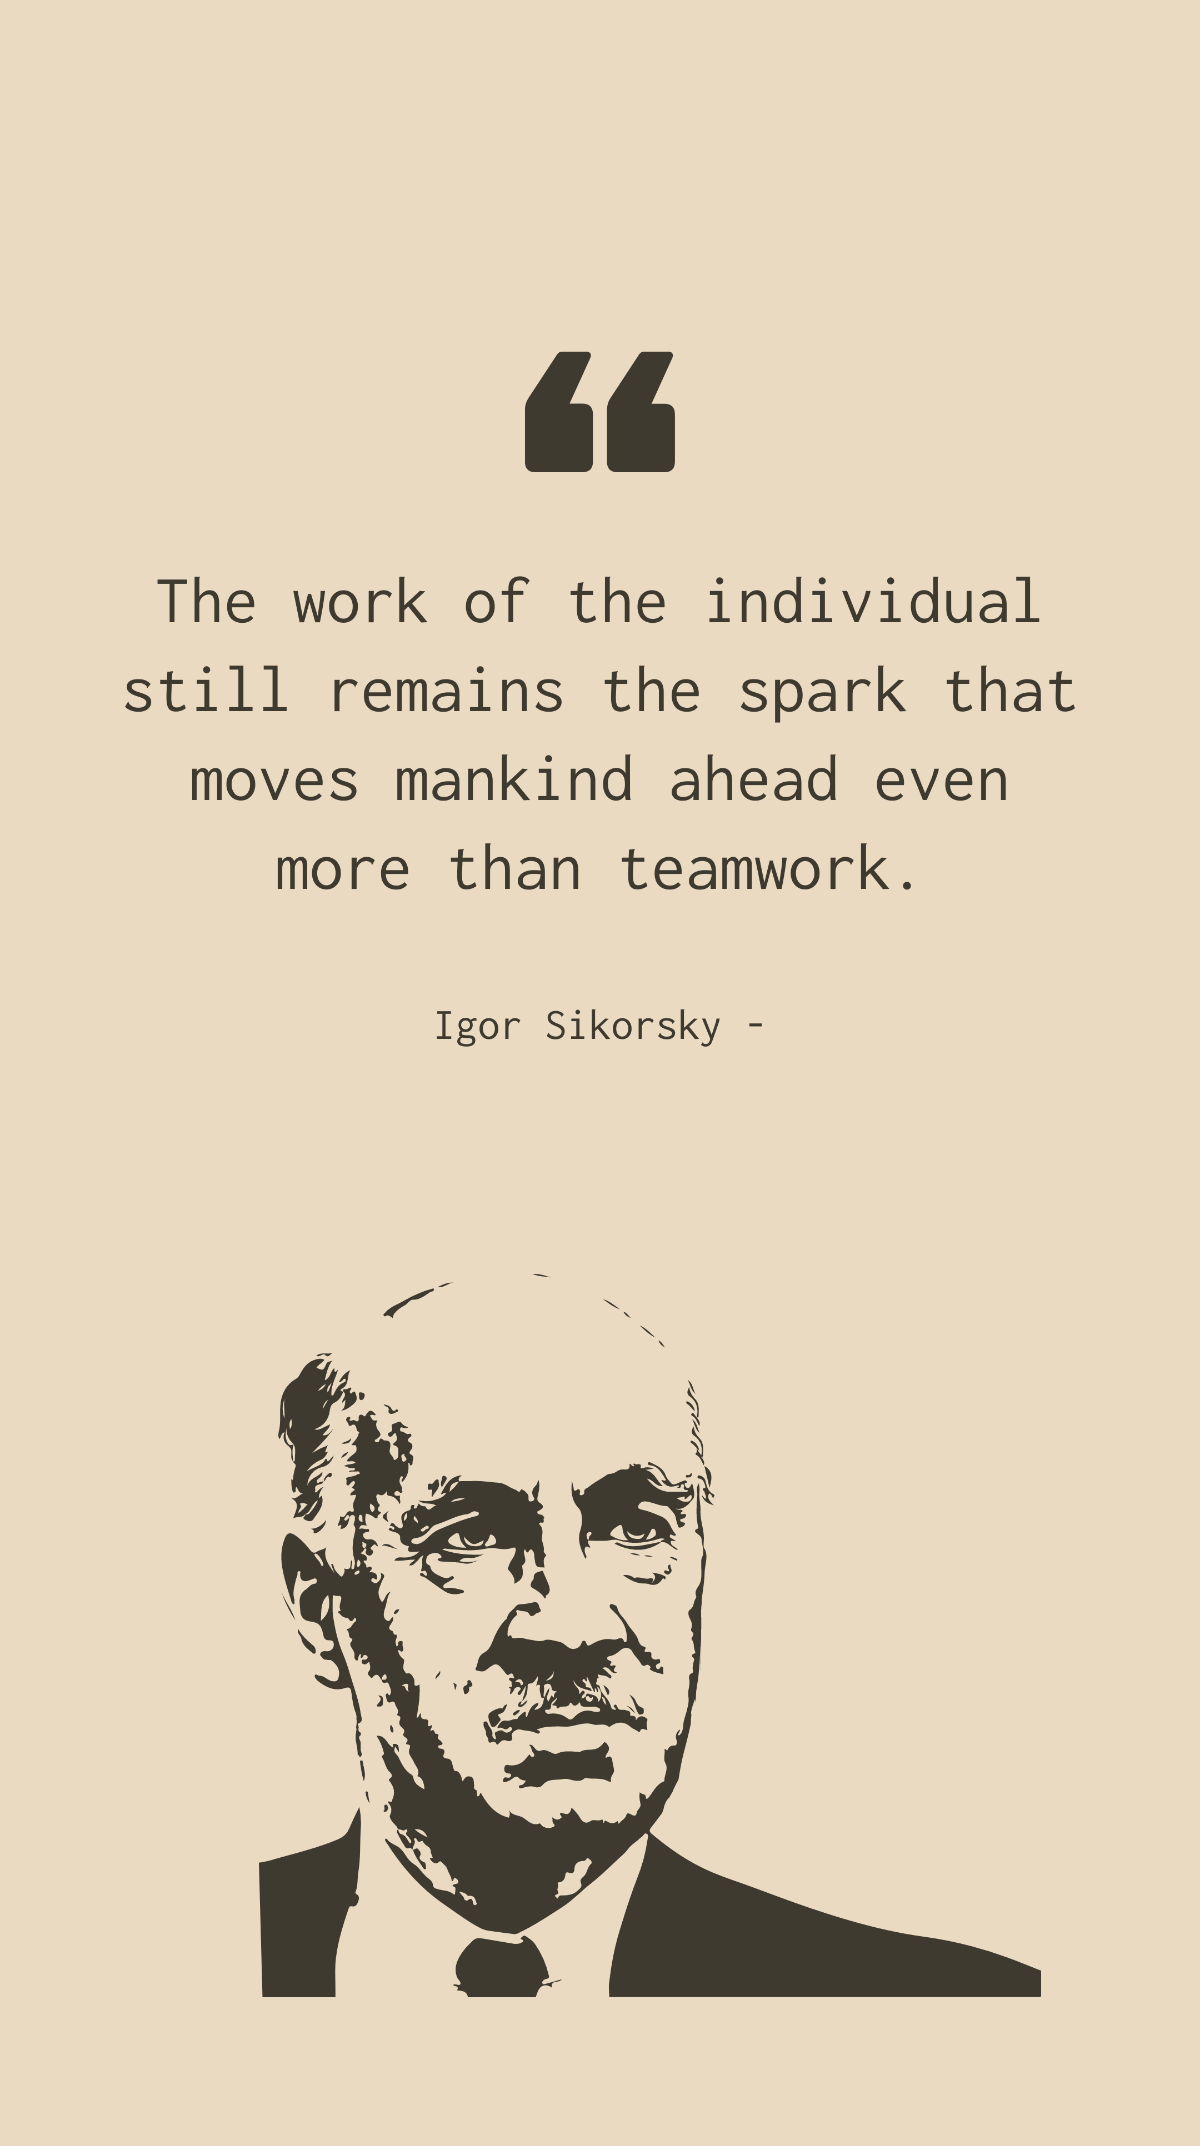 Igor Sikorsky - The work of the individual still remains the spark that moves mankind ahead even more than teamwork.